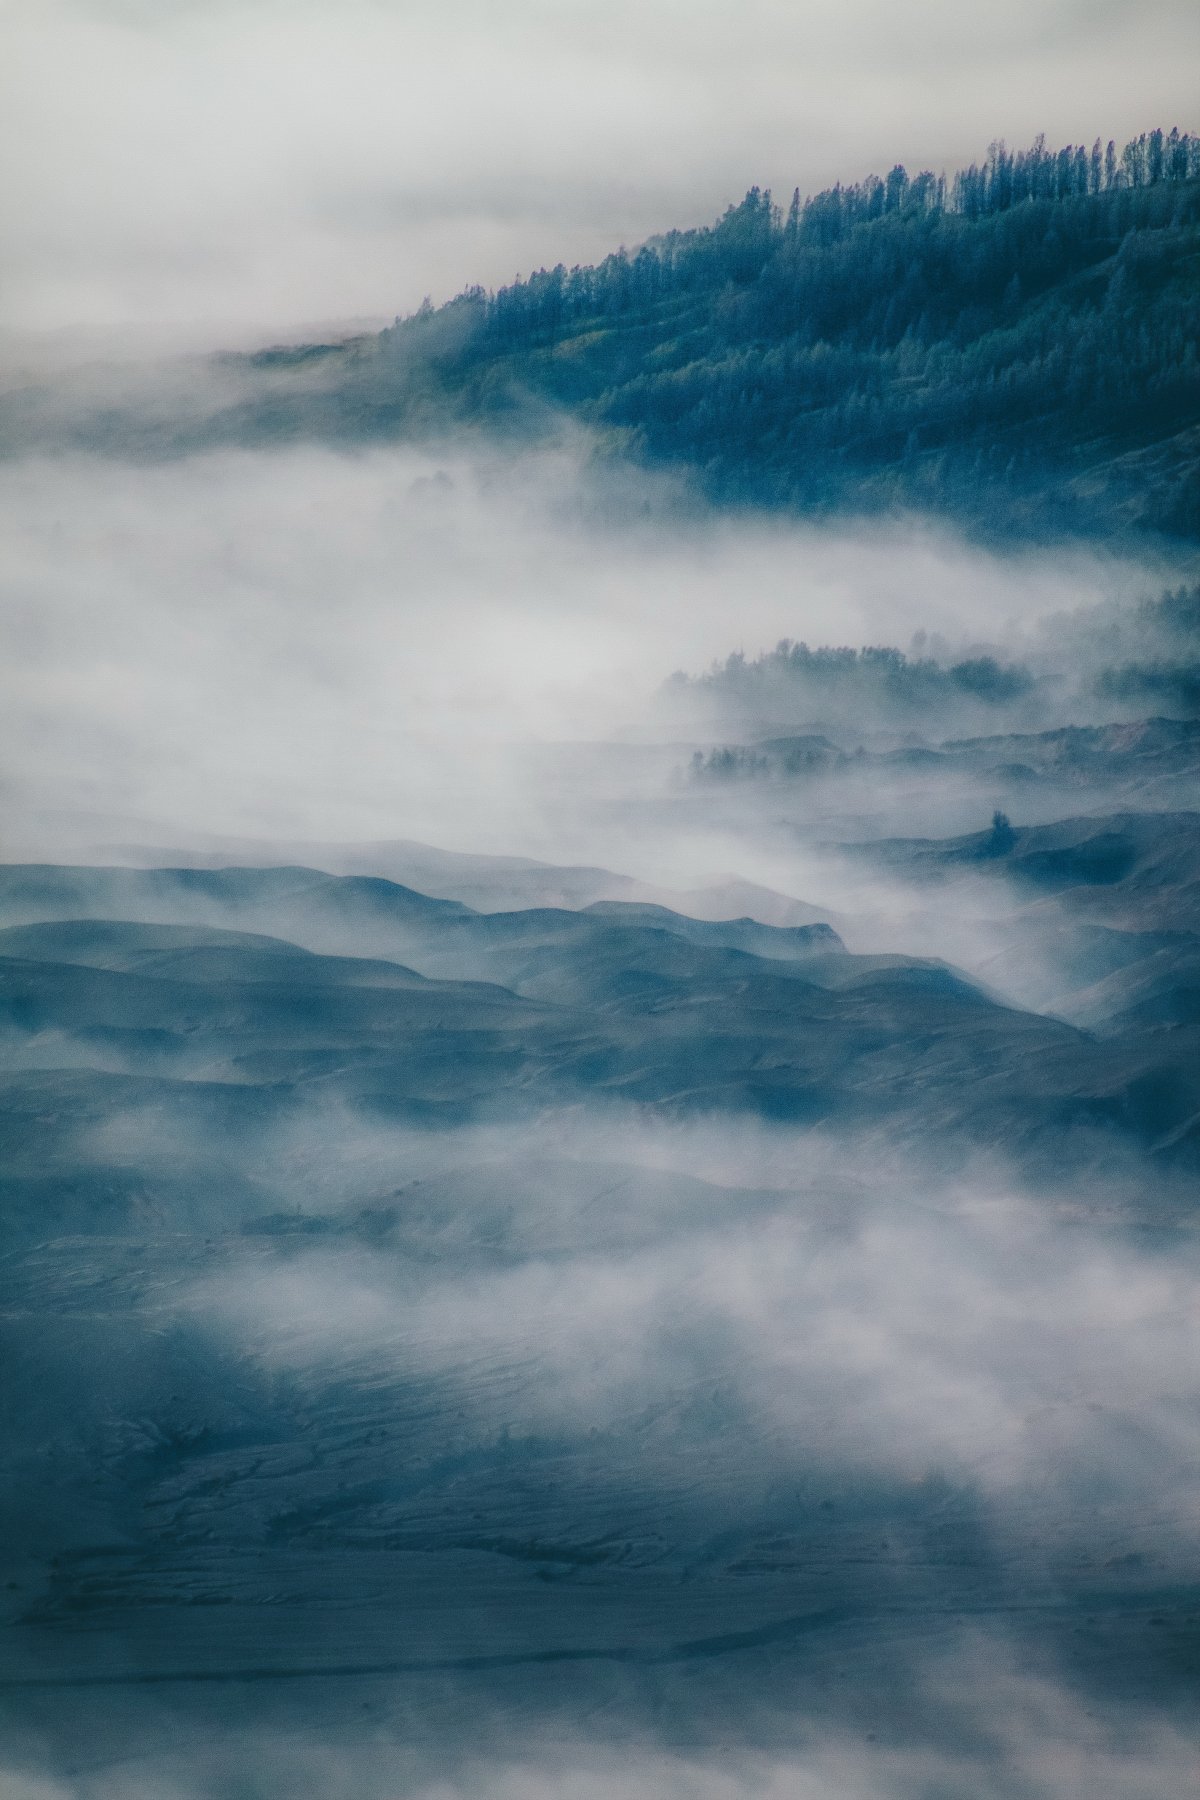 Pictures of beautiful scenery in the mountains surrounded by clouds and mist